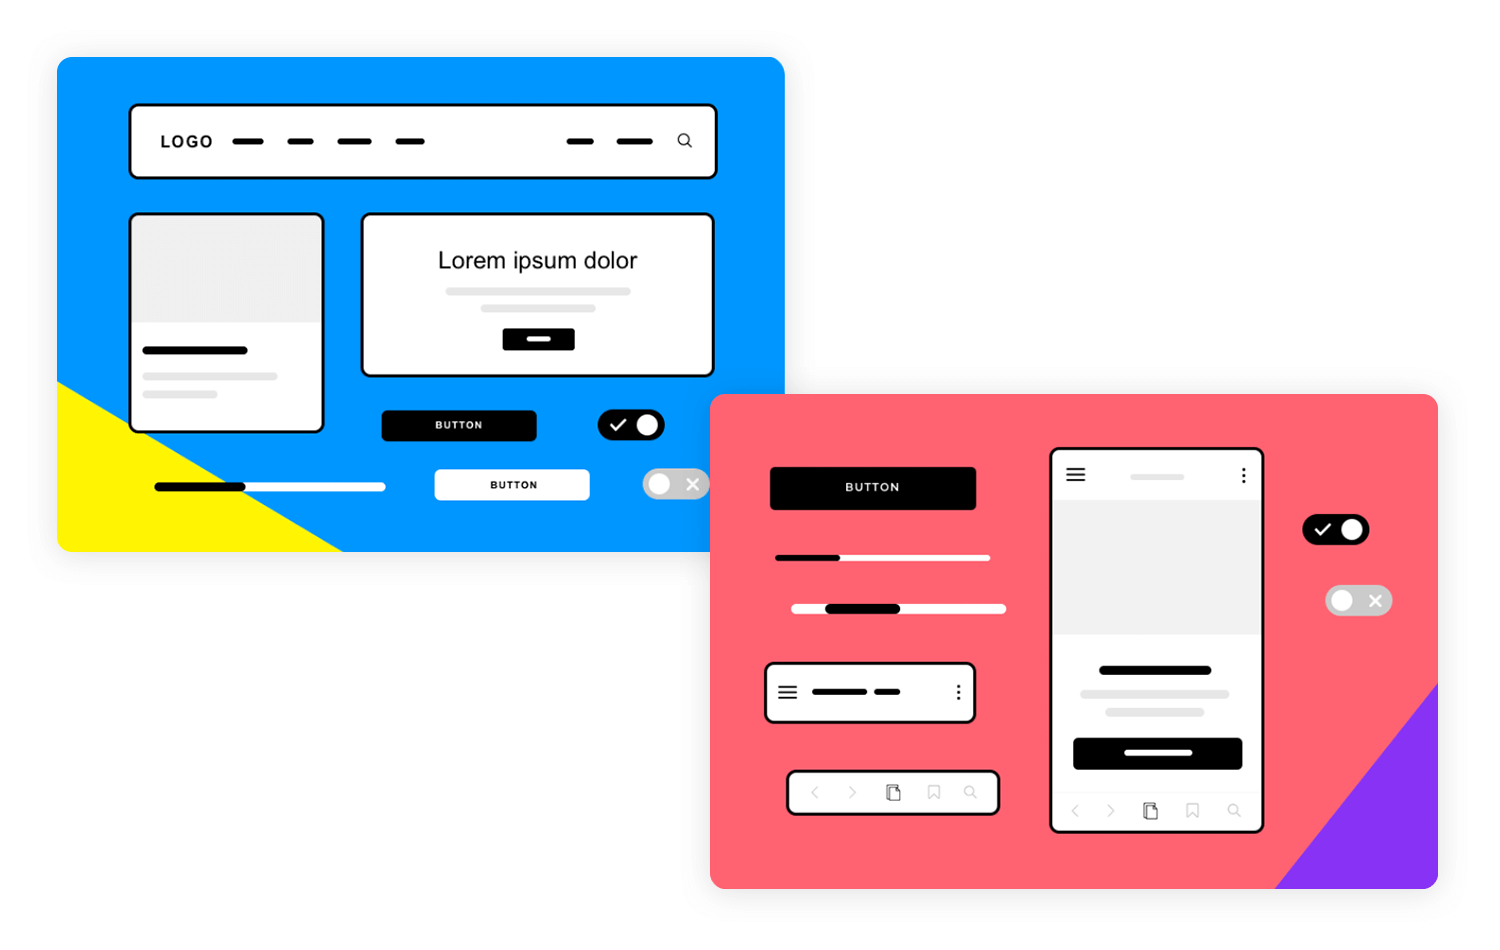 Wireframe design showcasing a website and mobile interface with key elements like buttons, search bars, and text fields, illustrated in vivid blue and red backgrounds